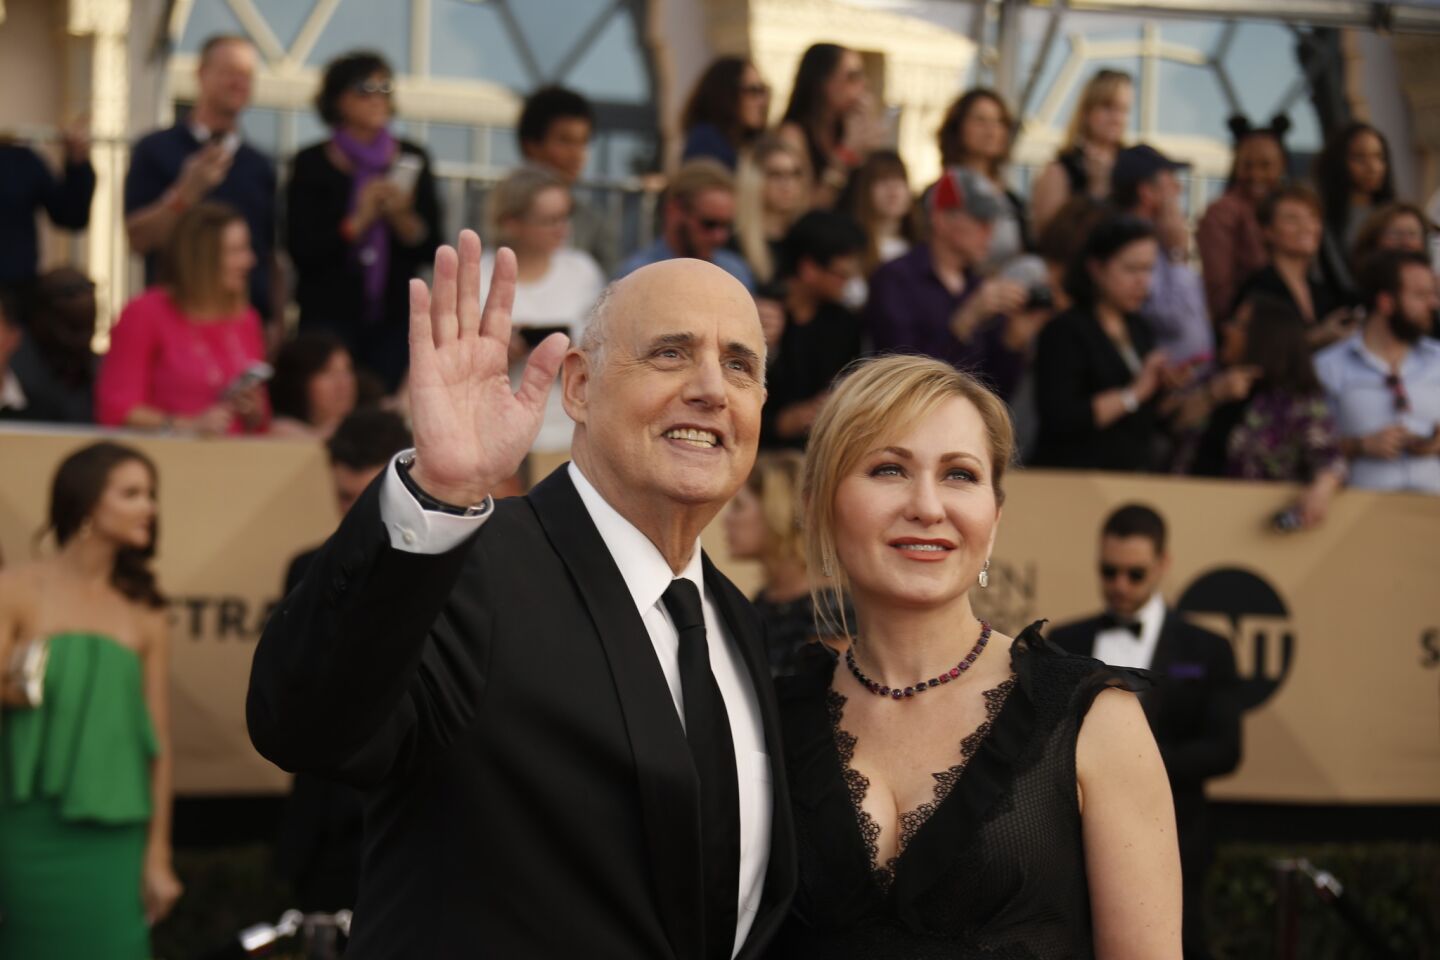 Jeffery Tambor, with wife Kasia Ostlun, is a nominee for "Transparent."